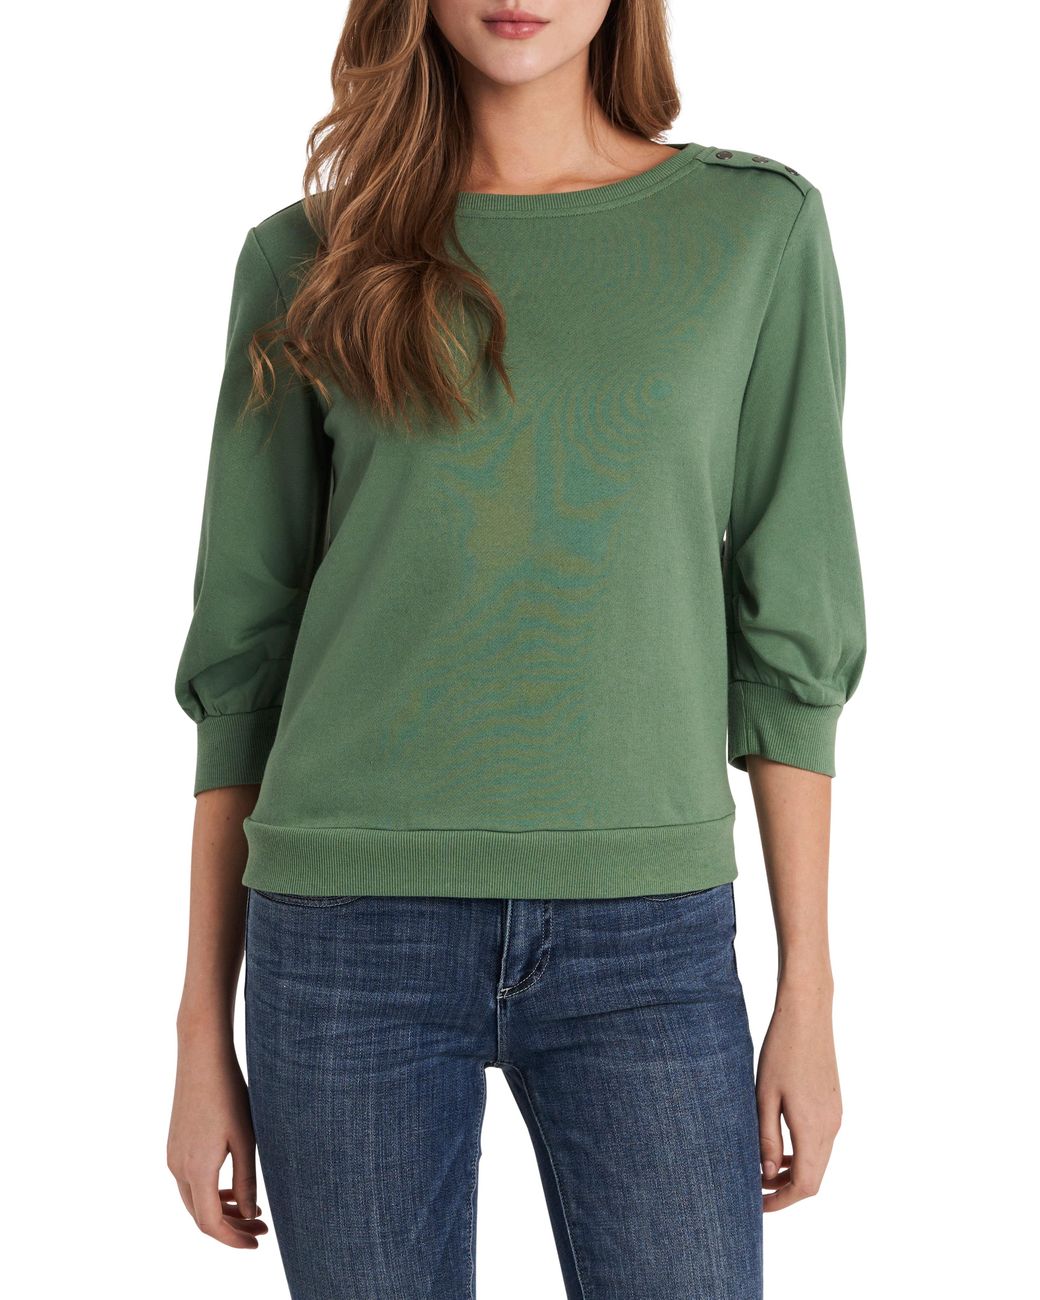 Vince Camuto Puff Sleeve Top in Green - Lyst